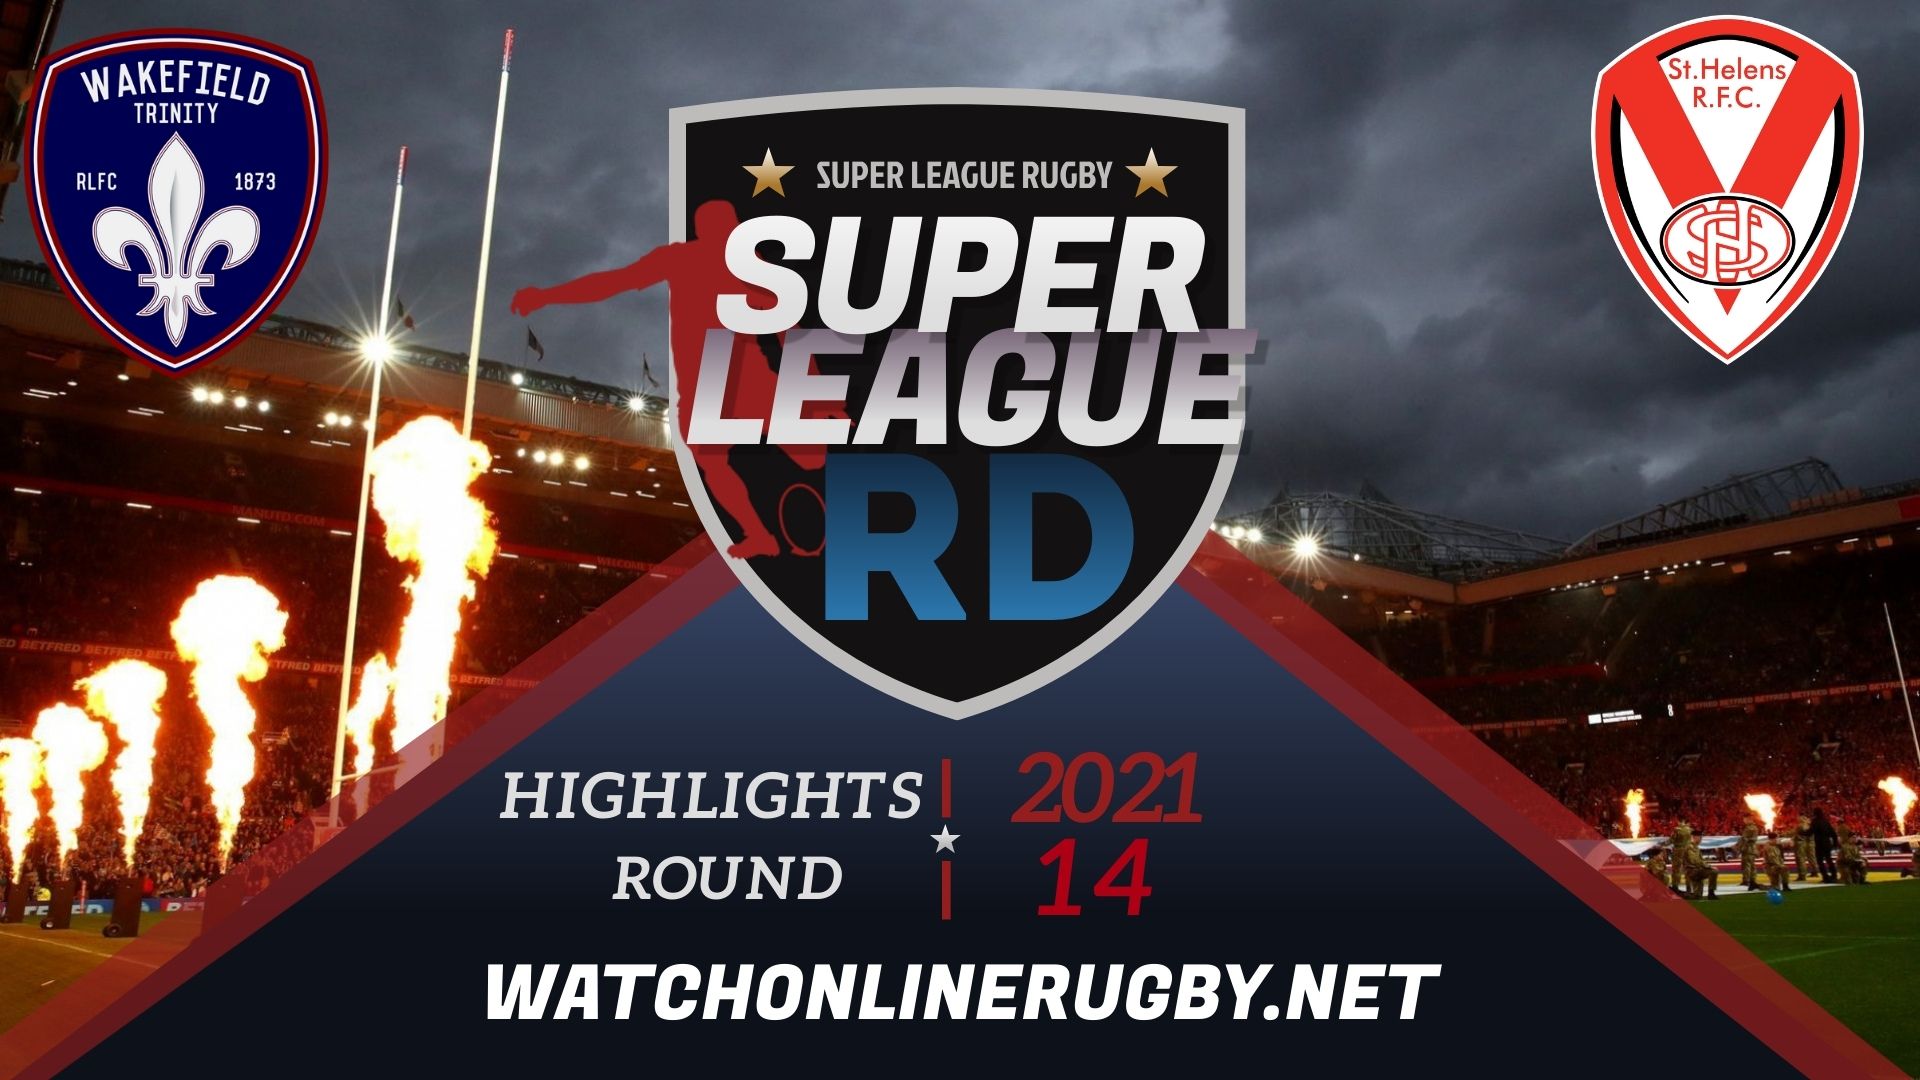 Wakefield Trinity Vs St Helens Super League Rugby 2021 RD 14